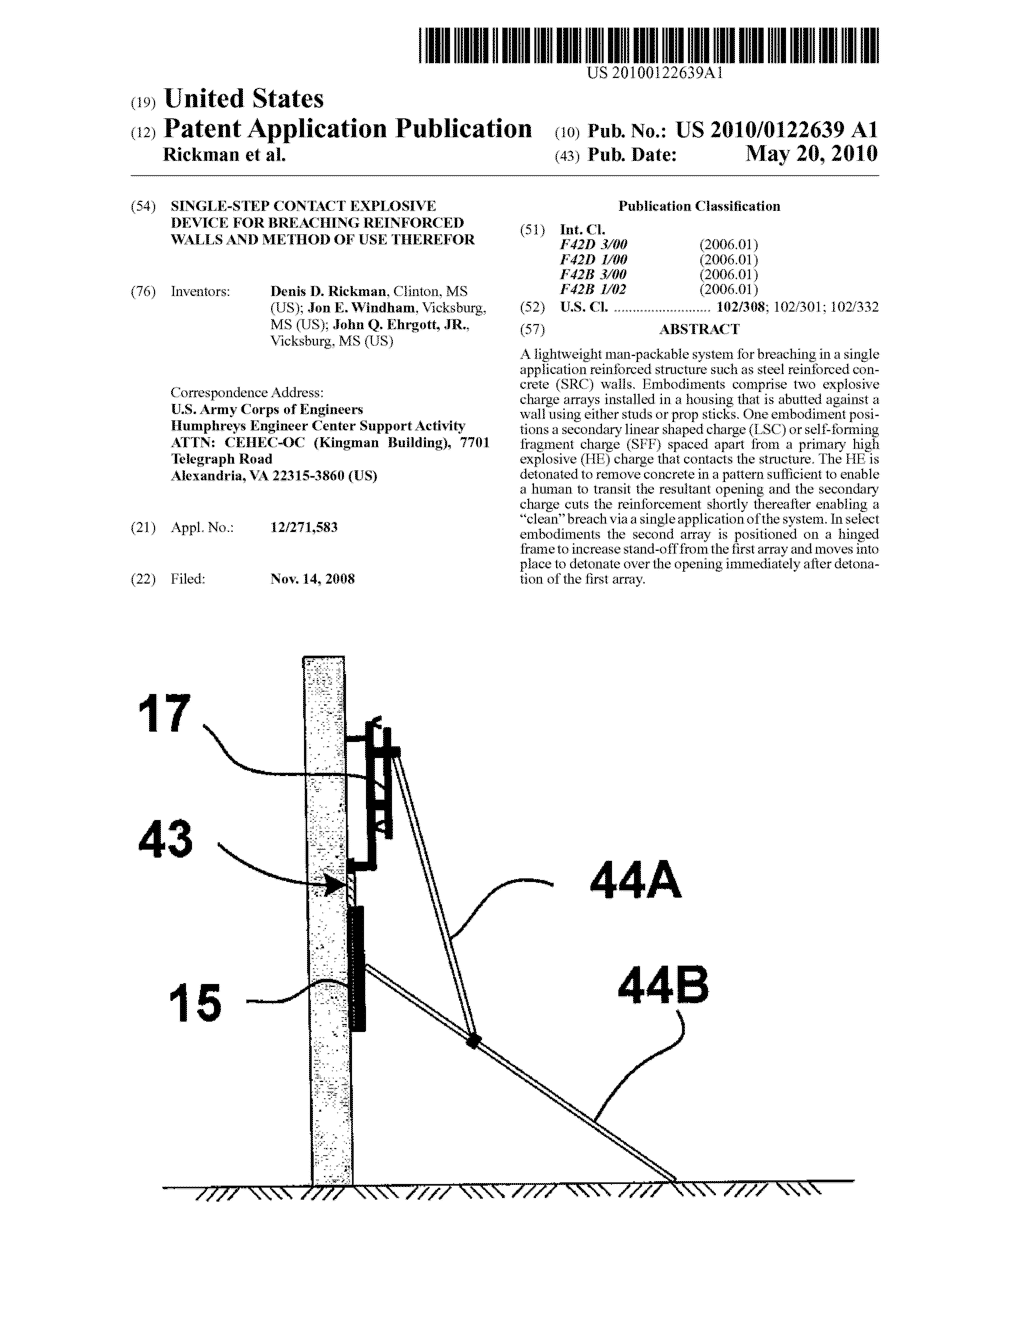 SINGLE-STEP CONTACT EXPLOSIVE DEVICE FOR BREACHING REINFORCED WALLS AND METHOD OF USE THEREFOR - diagram, schematic, and image 01